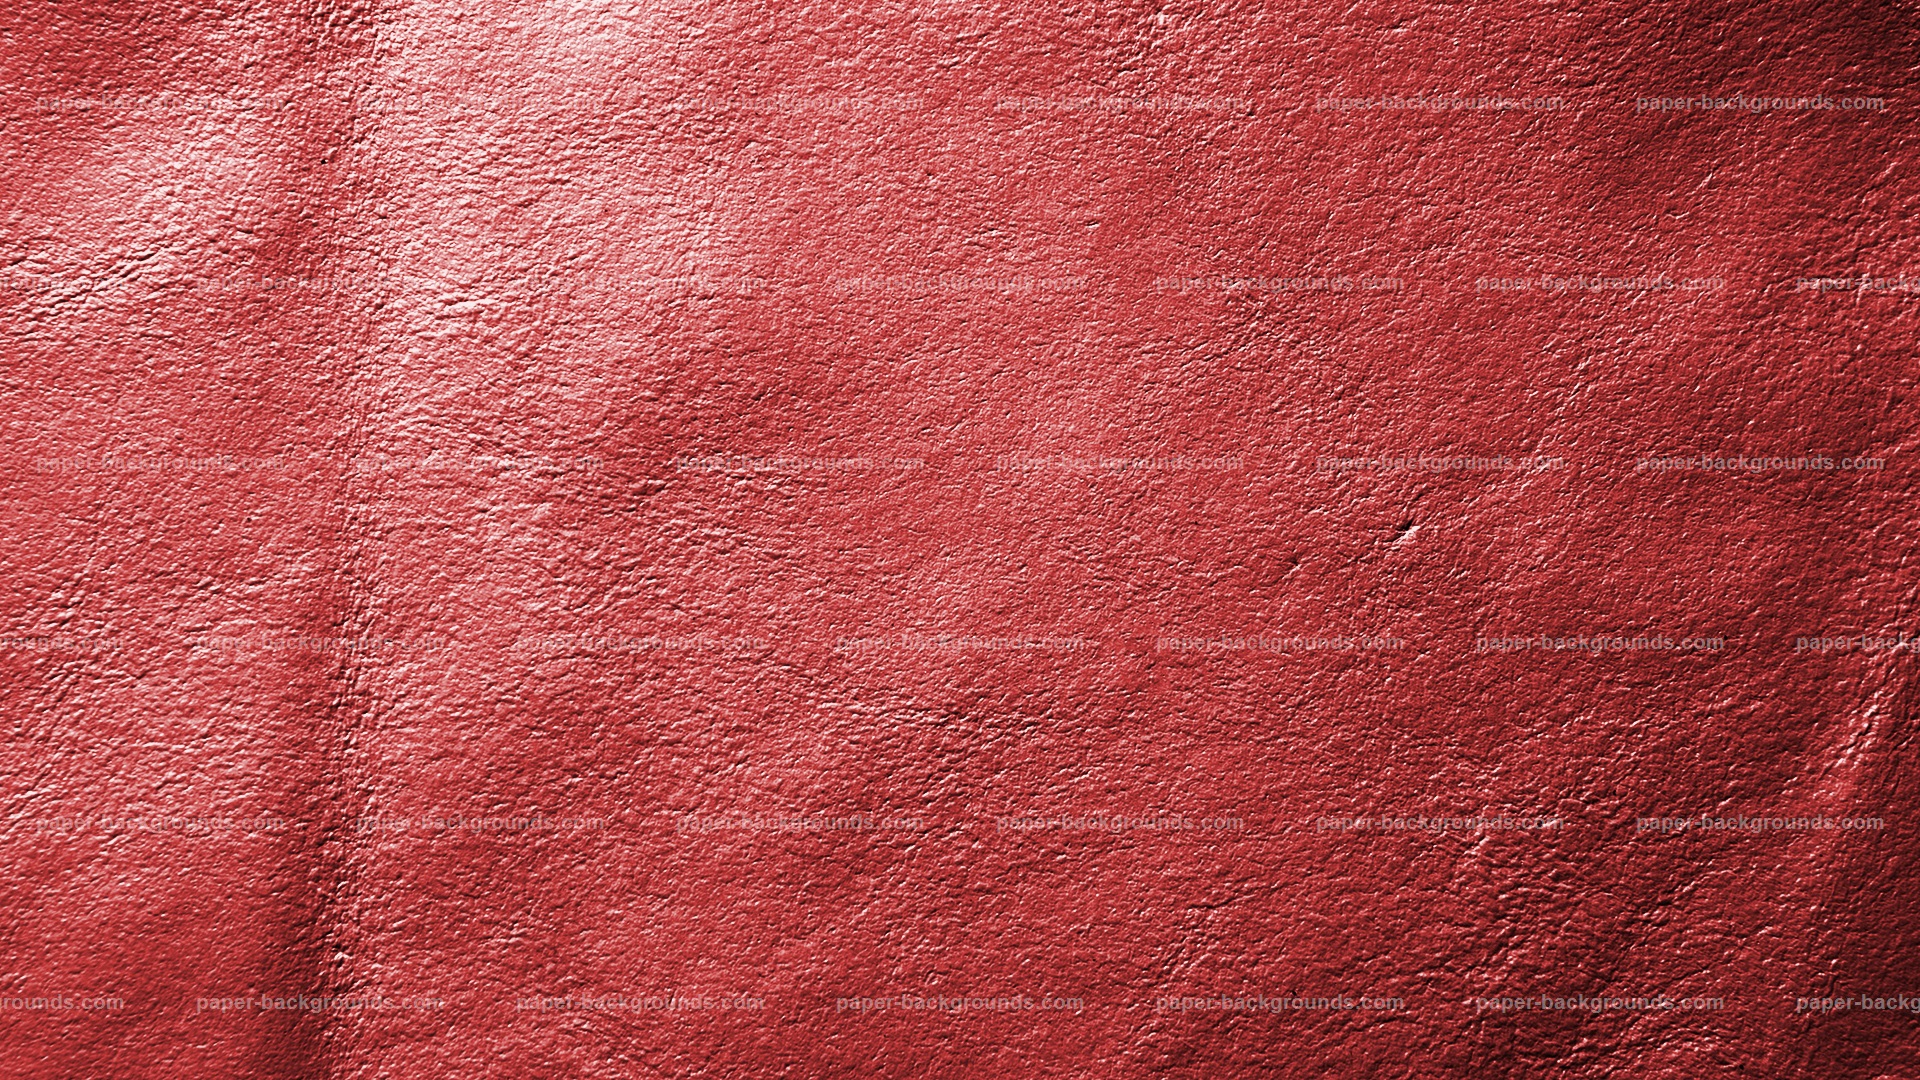 Red Shinny Leather Texture Paper Backgrounds